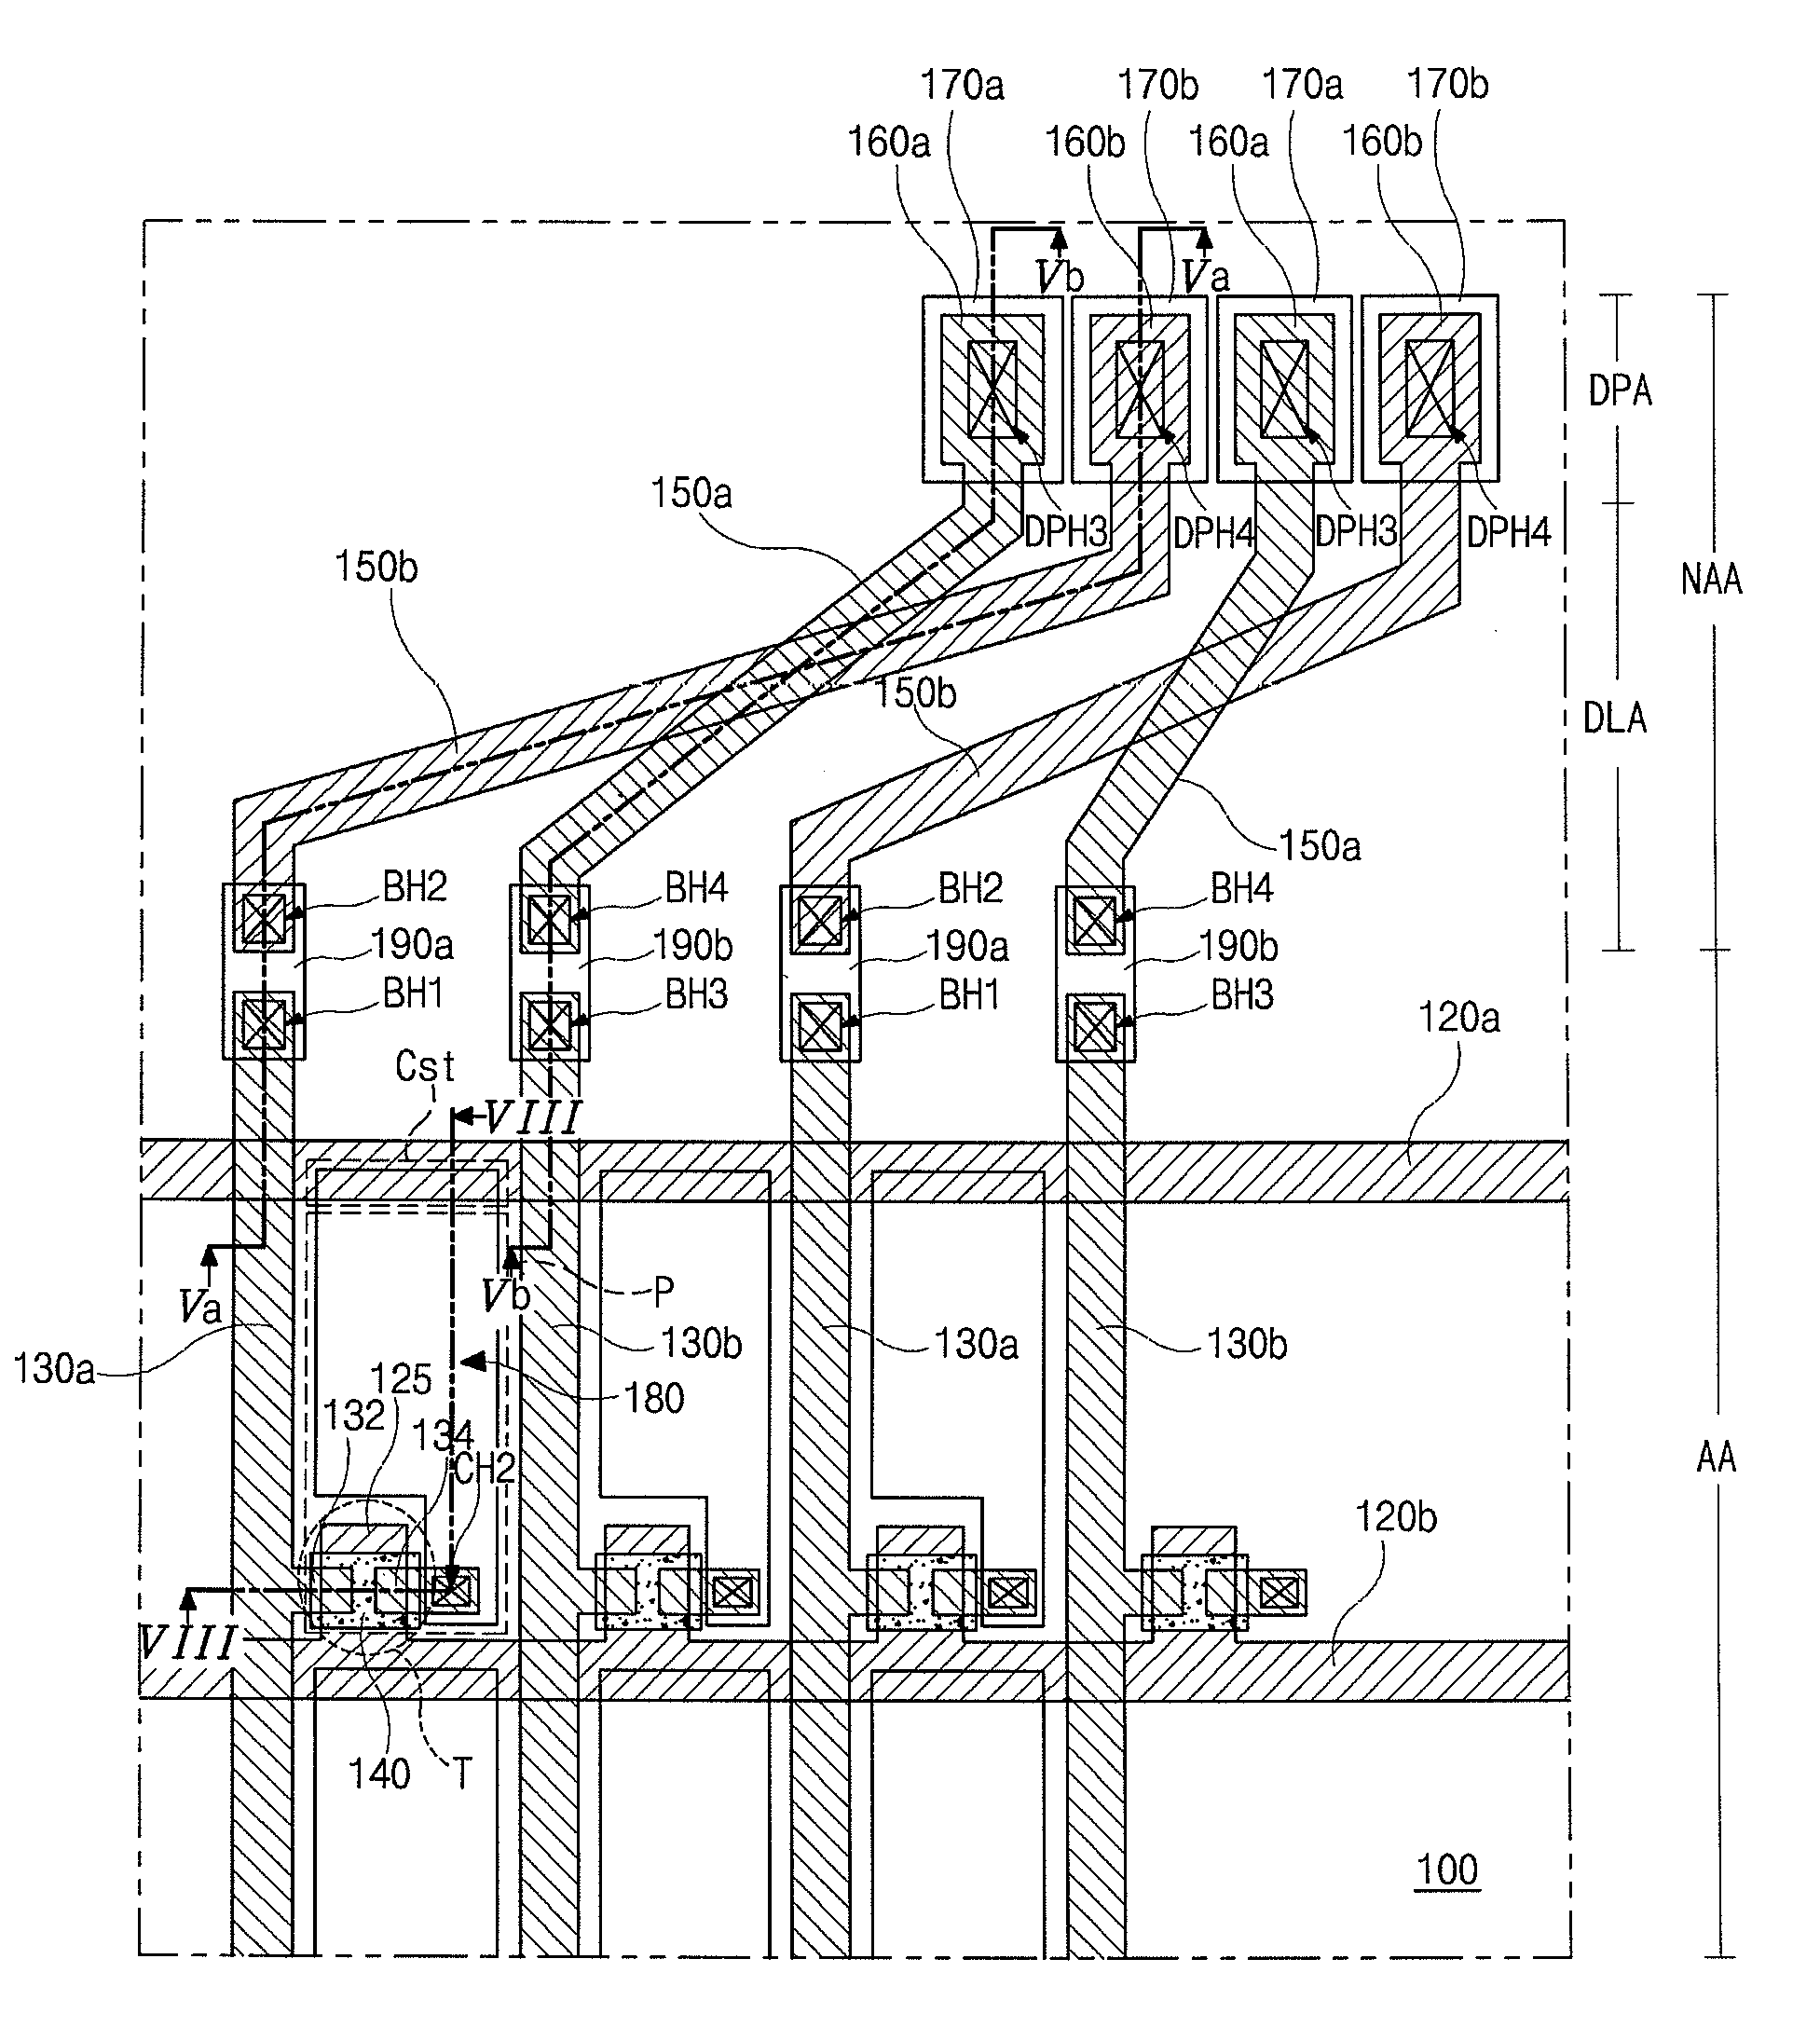 Liquid crystal display device comprising first and second data link lines electrically connected to odd and even data lines respectively and crossing each other to connect even and odd data pad electrodes respectively